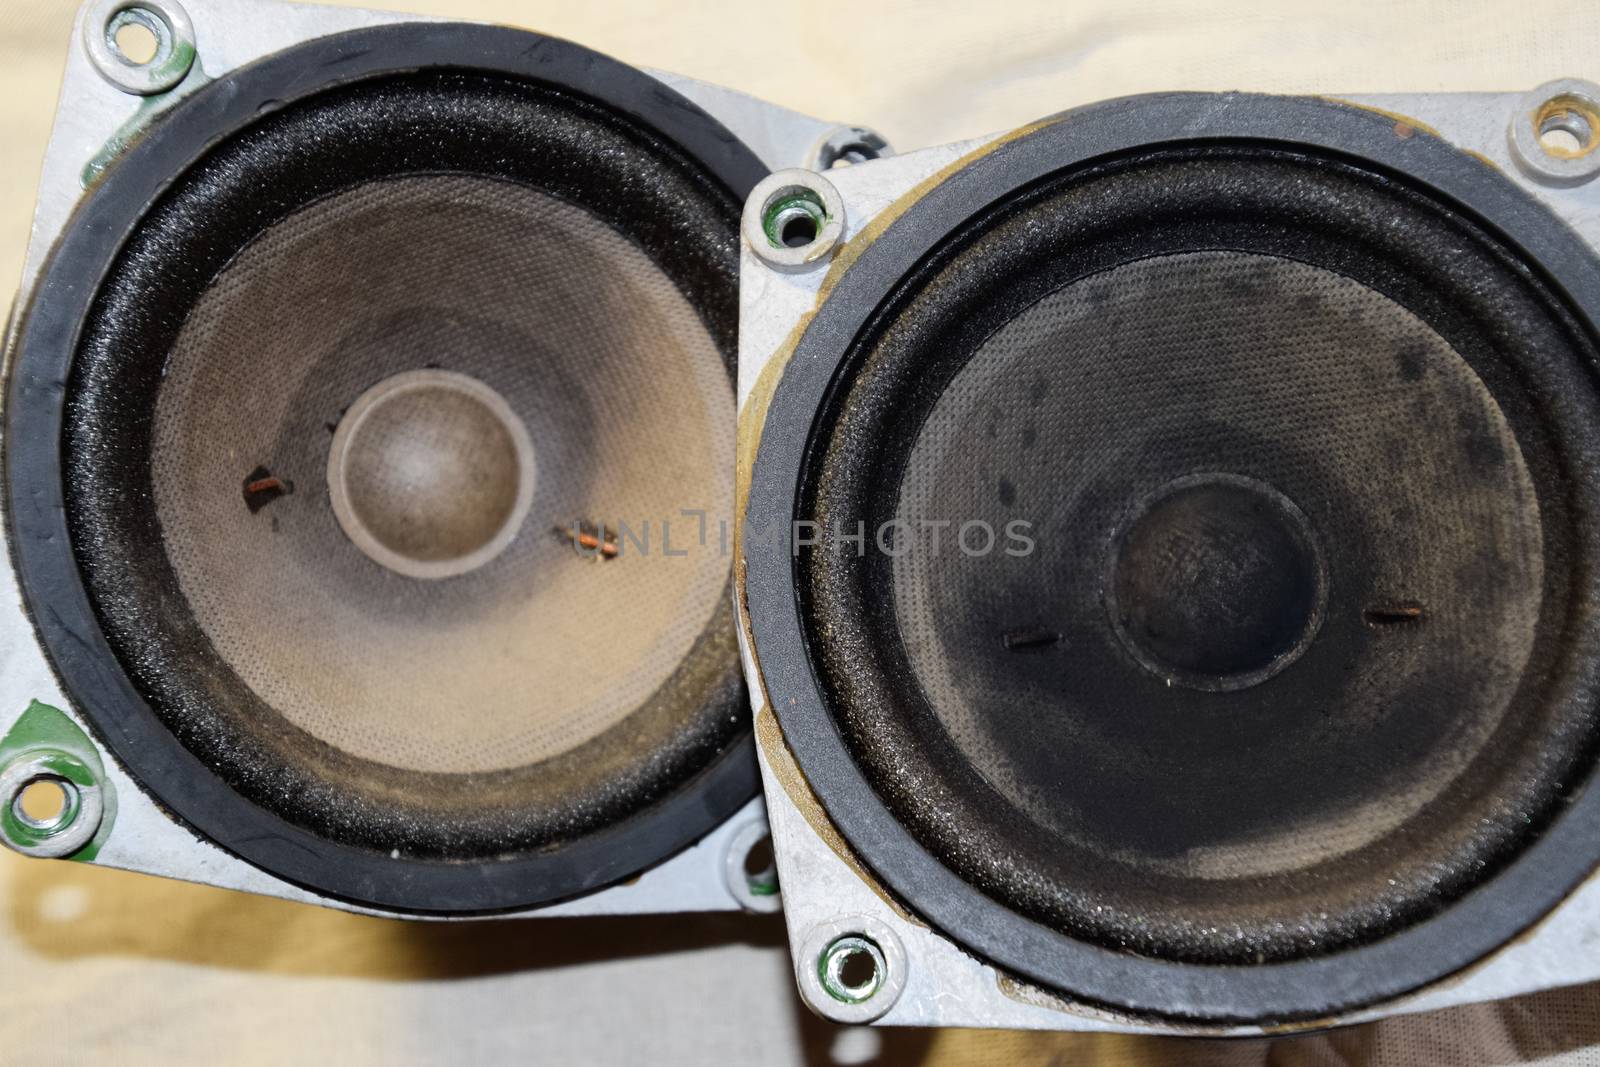 Medium-frequency speakers 20gds-3. Soviet vintage acoustics, elements of a music column.